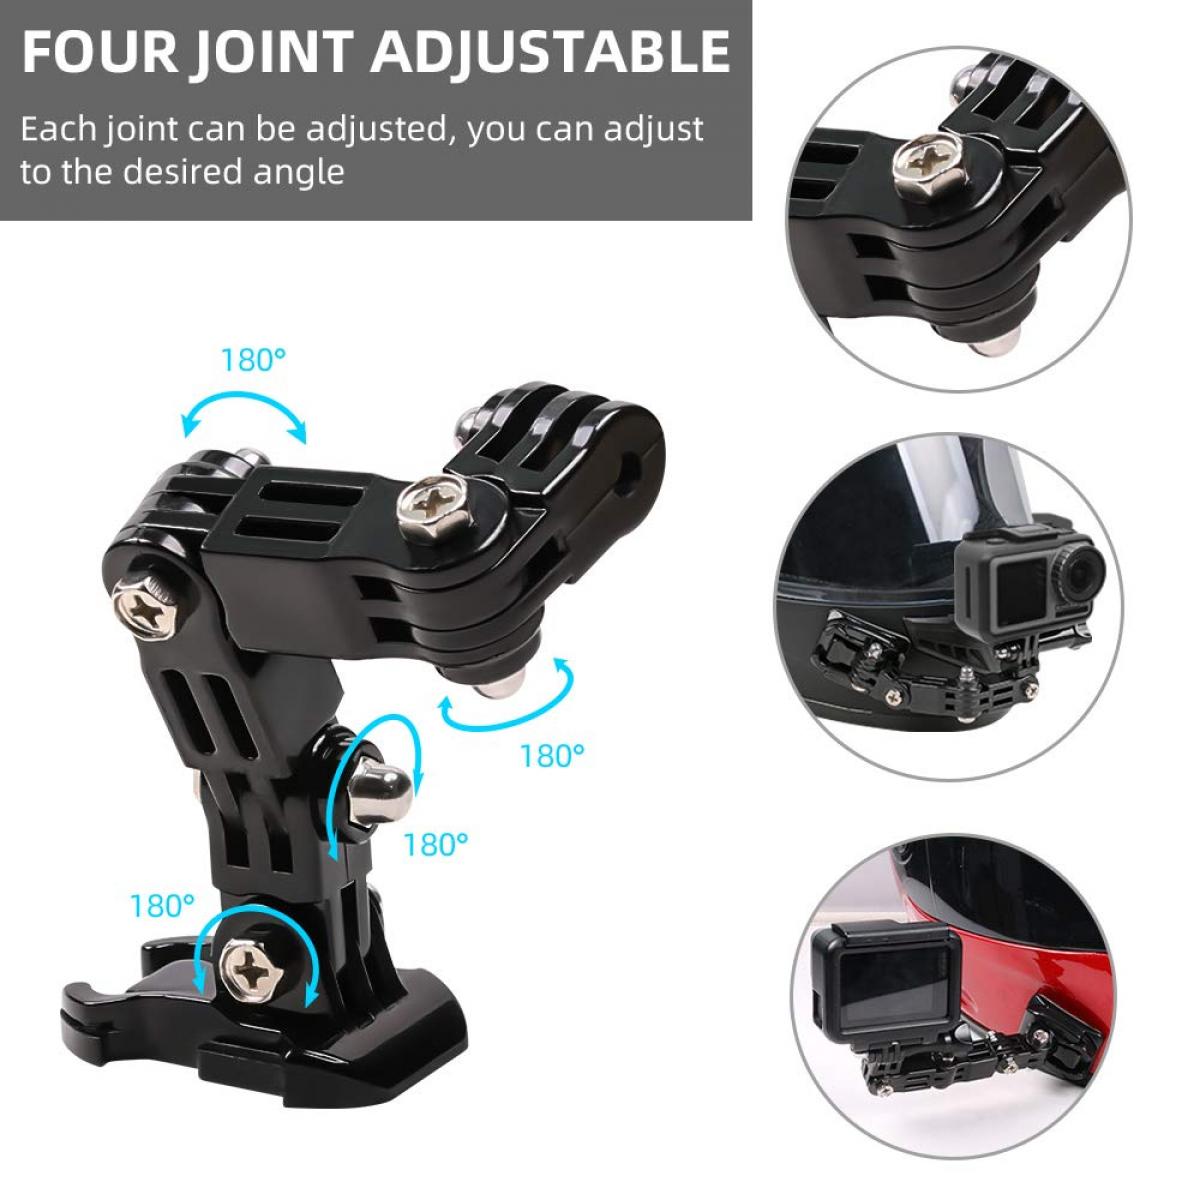 Motorcycle Accessories Helmet Chin Mount Kit for Insta360 One X3, X2, X, R,  Go 2, GoPro Hero11, 10, 9, 8, 7, 6, 5, 4, Session, 3+, DJI Osmo Action 2